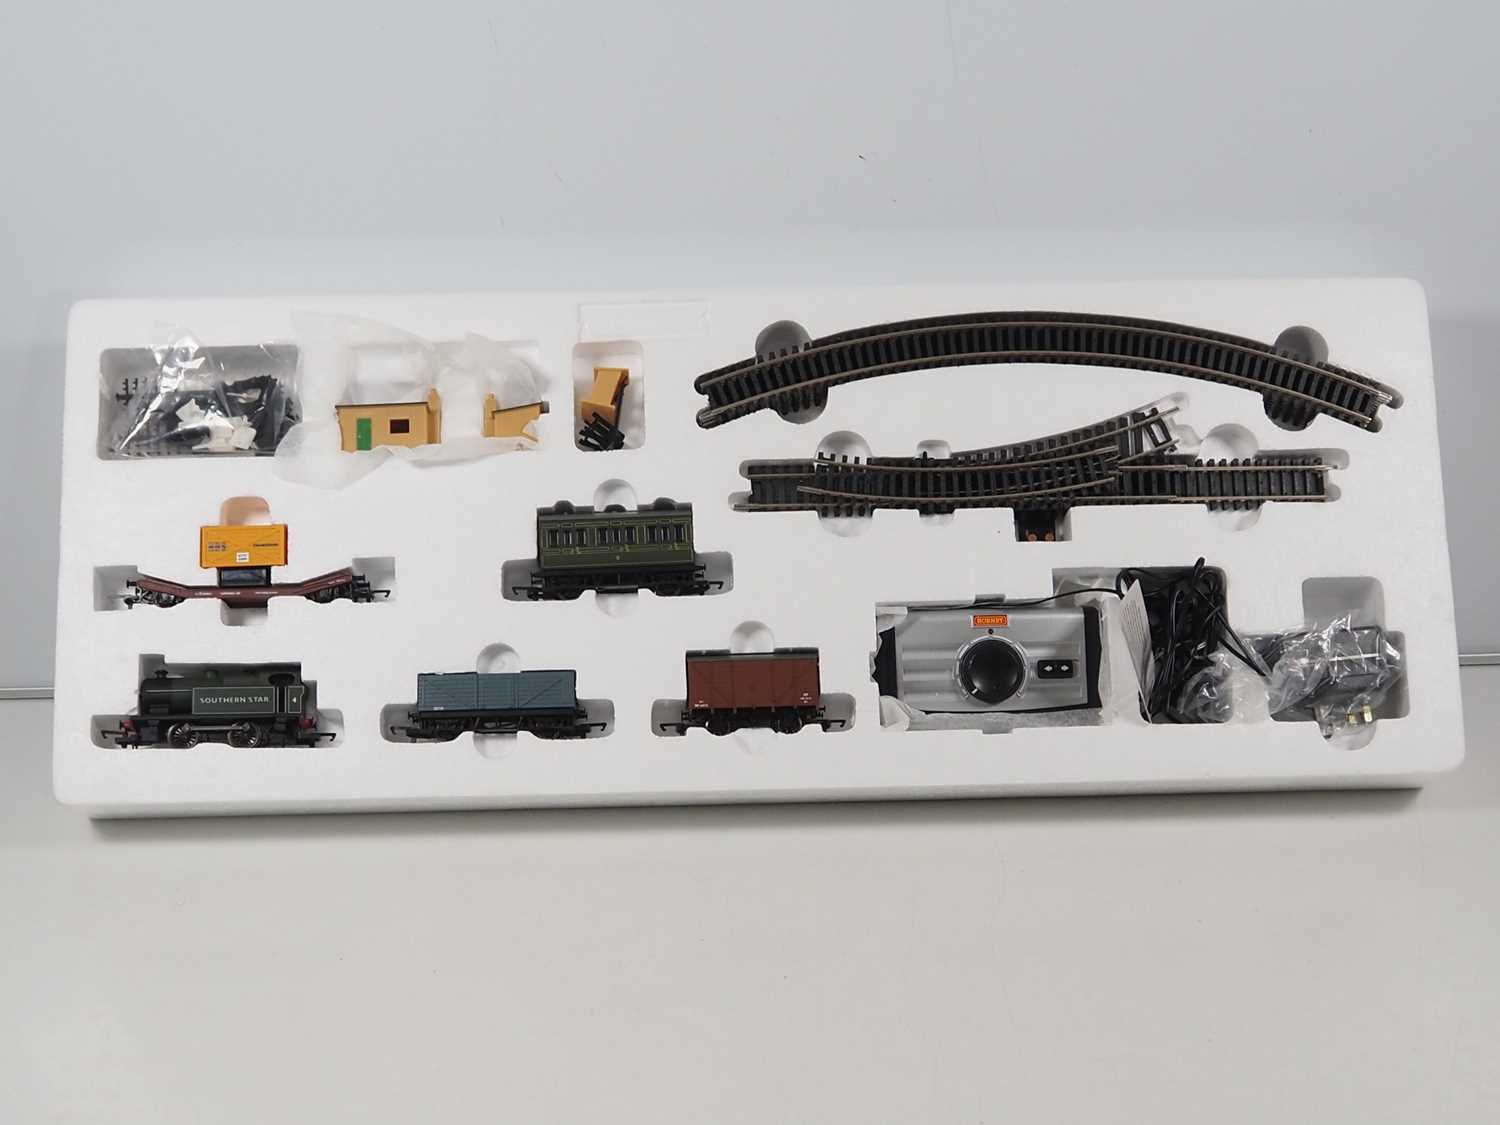 A HORNBY R1132 OO gauge 'The Southern Star' train set comprising a steam loco, wagons, coach and - Image 2 of 8